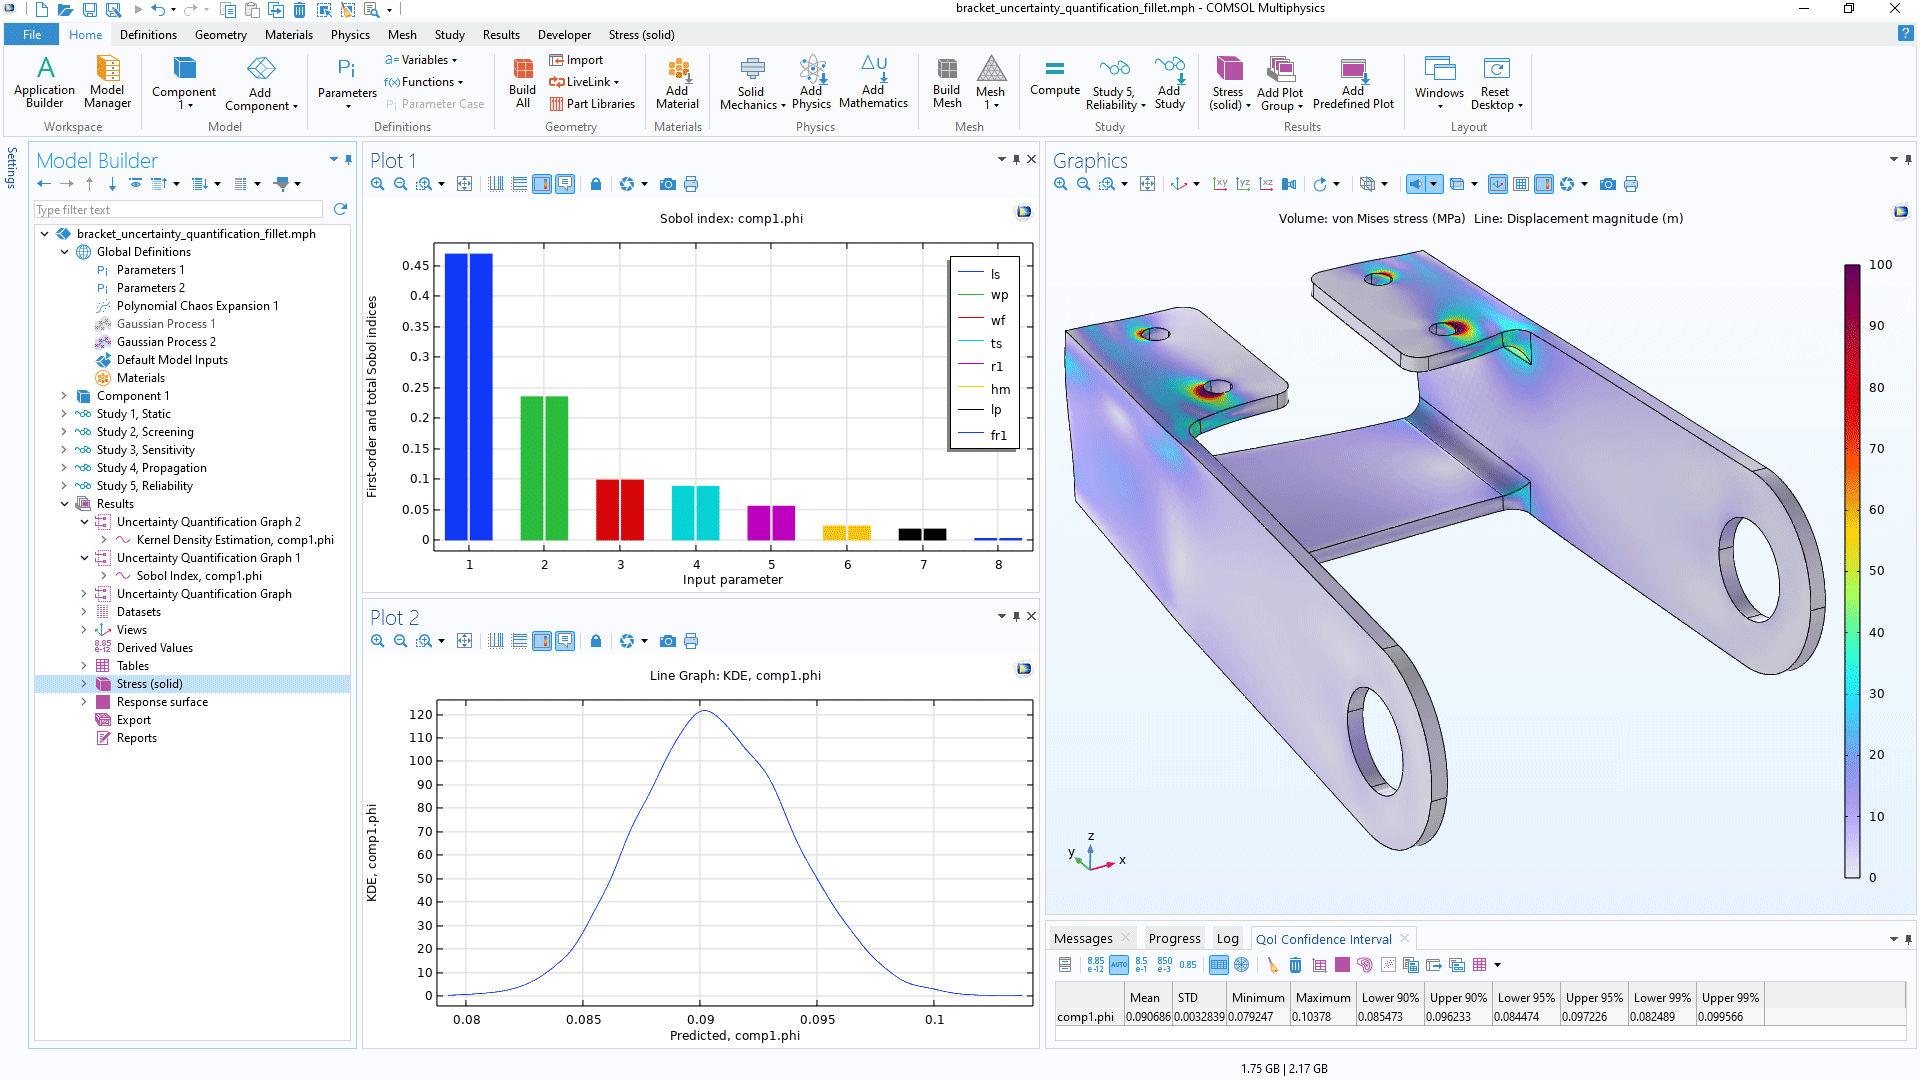 The COMSOL Multiphysics UI showing some Uncertainty Quantification study results, with a Sobol index plot, Kernel Density Estimation graph, as well as a Confidence interval table.